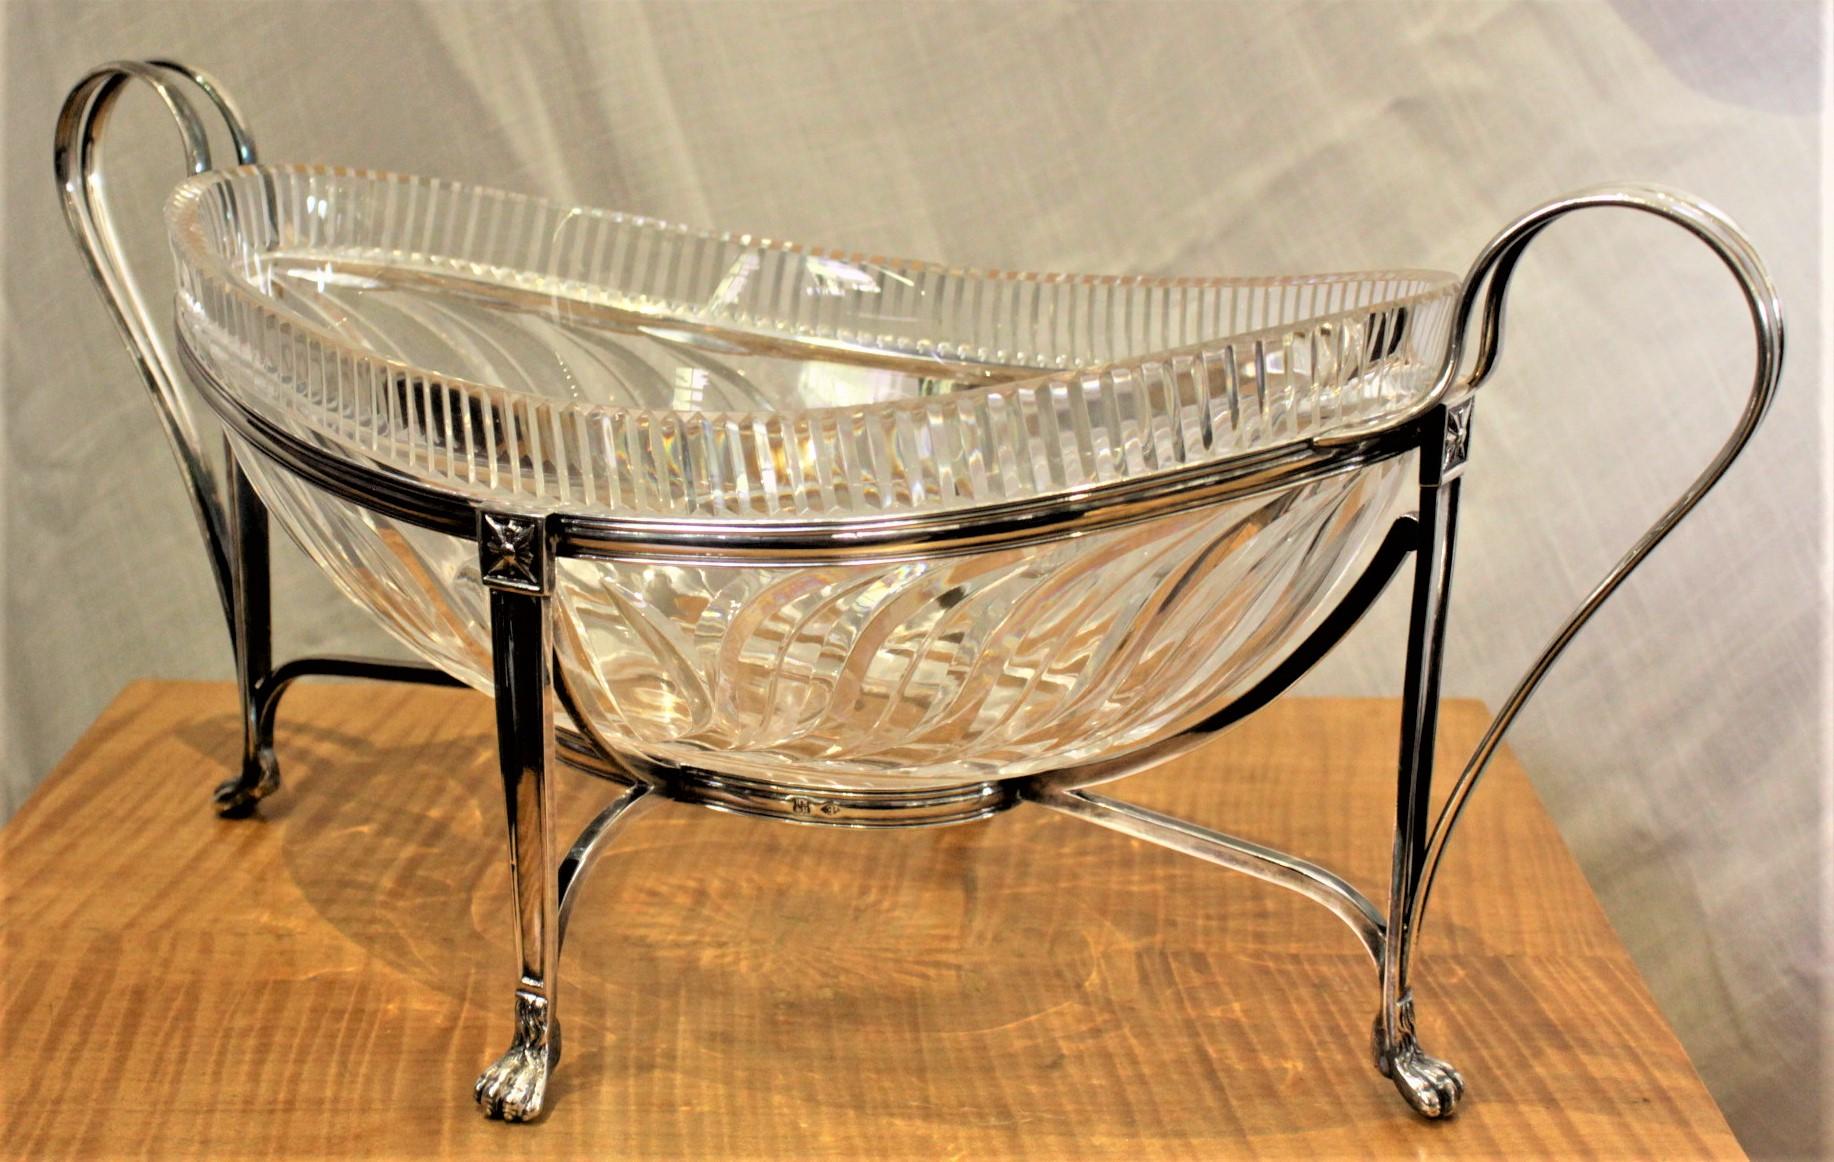 Victorian Antique Anglo-Irish Cut Crystal Centerpiece Bowl with Silver Plated Stand For Sale